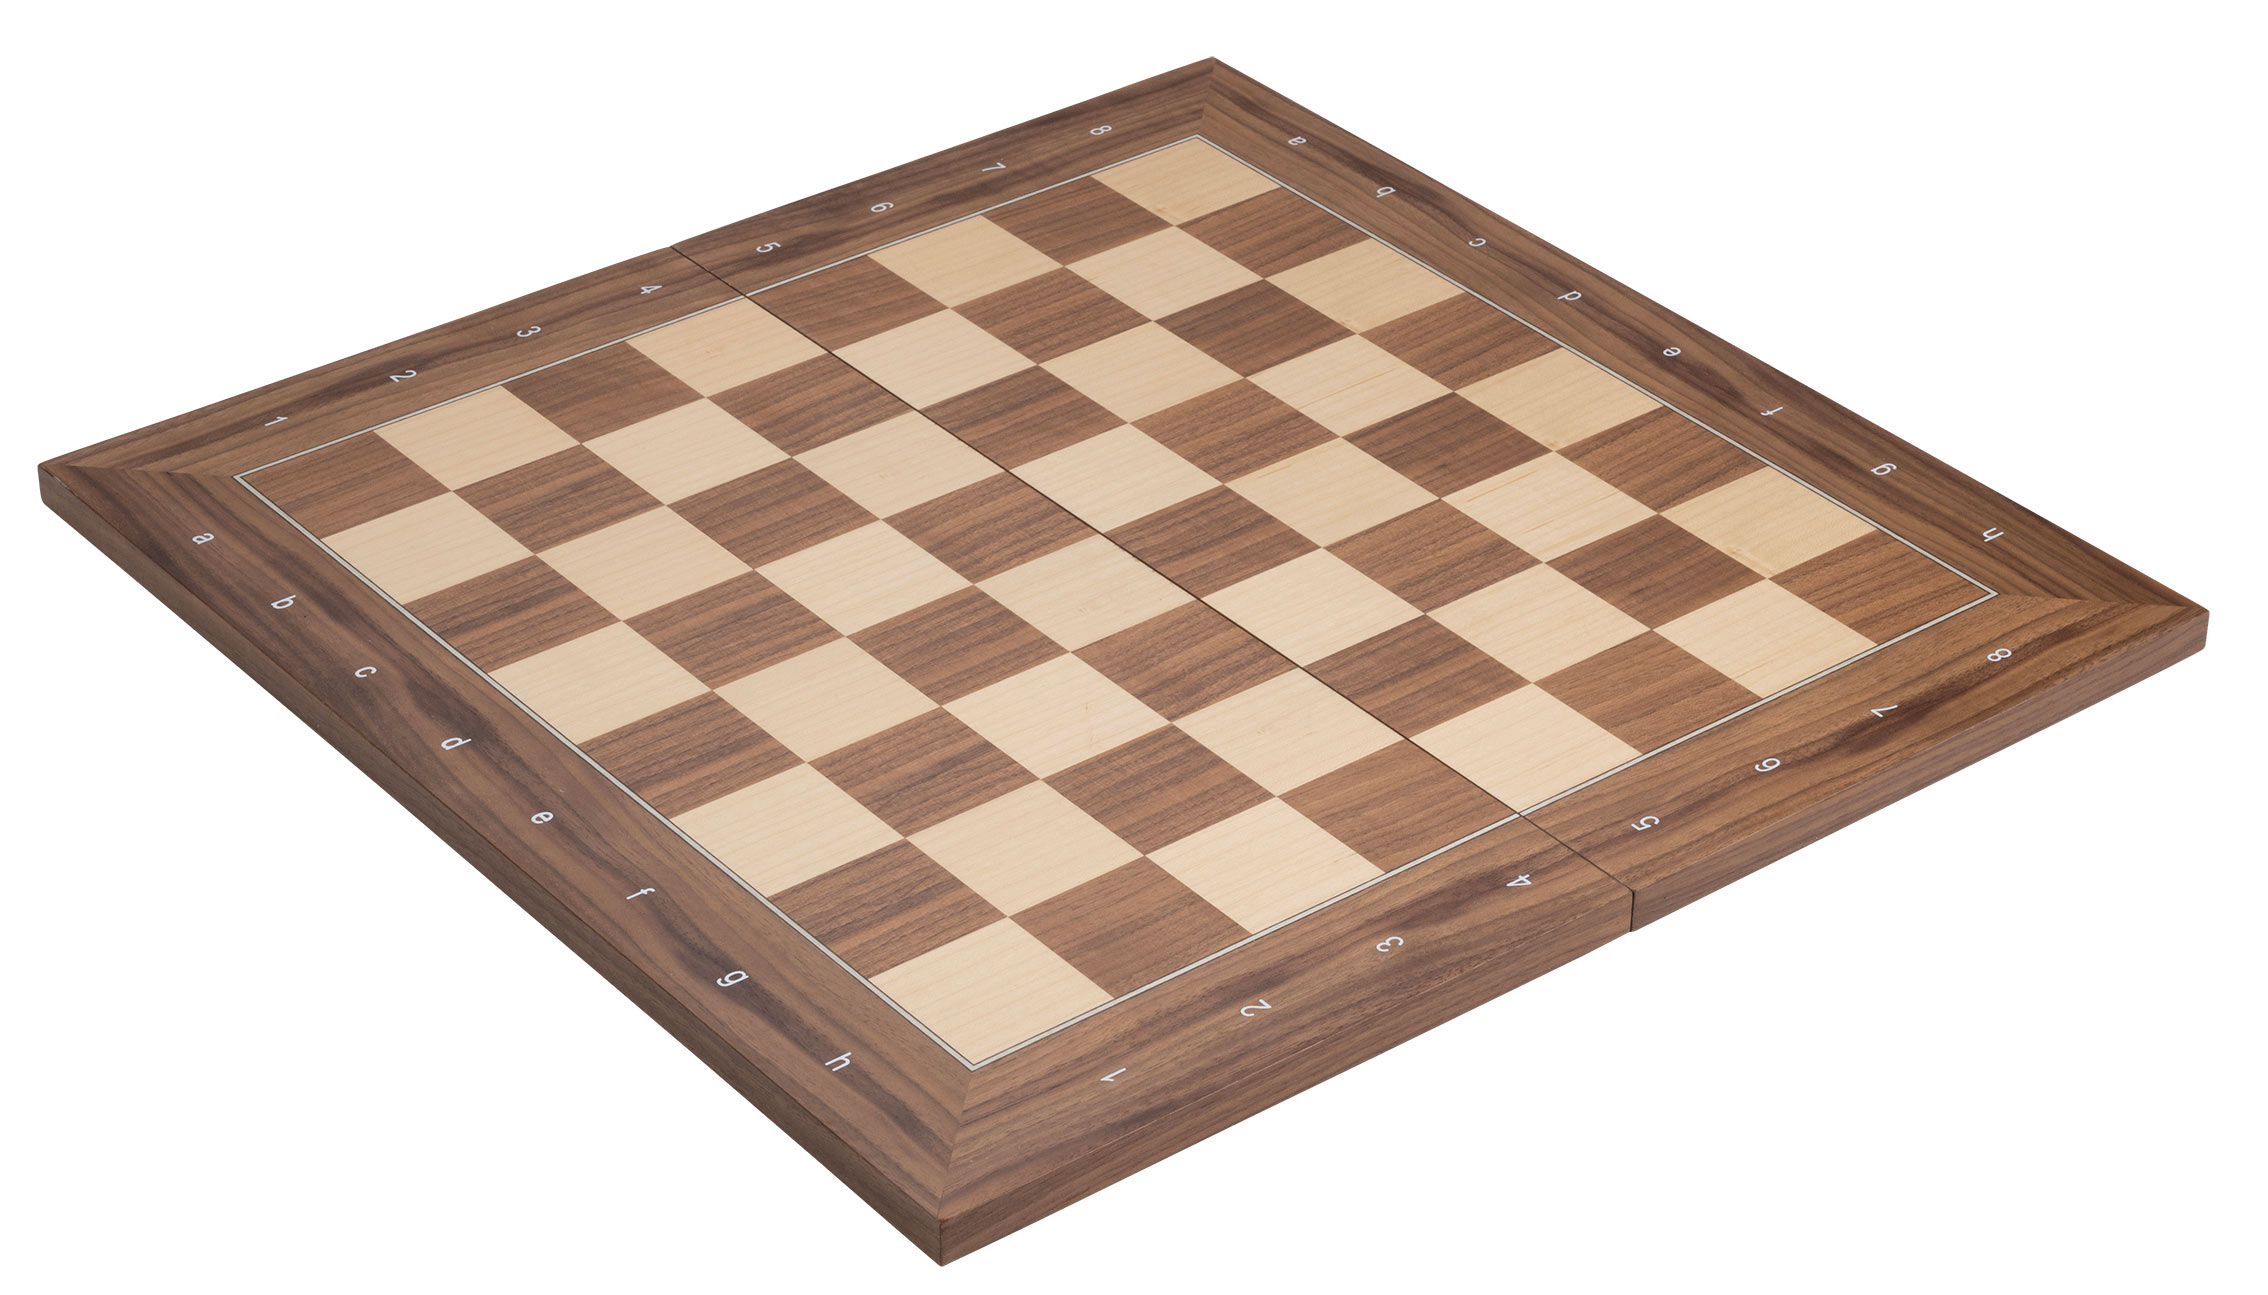 Chessboard Kopenhagen, field 50 mm, foldable, with numbers and letters